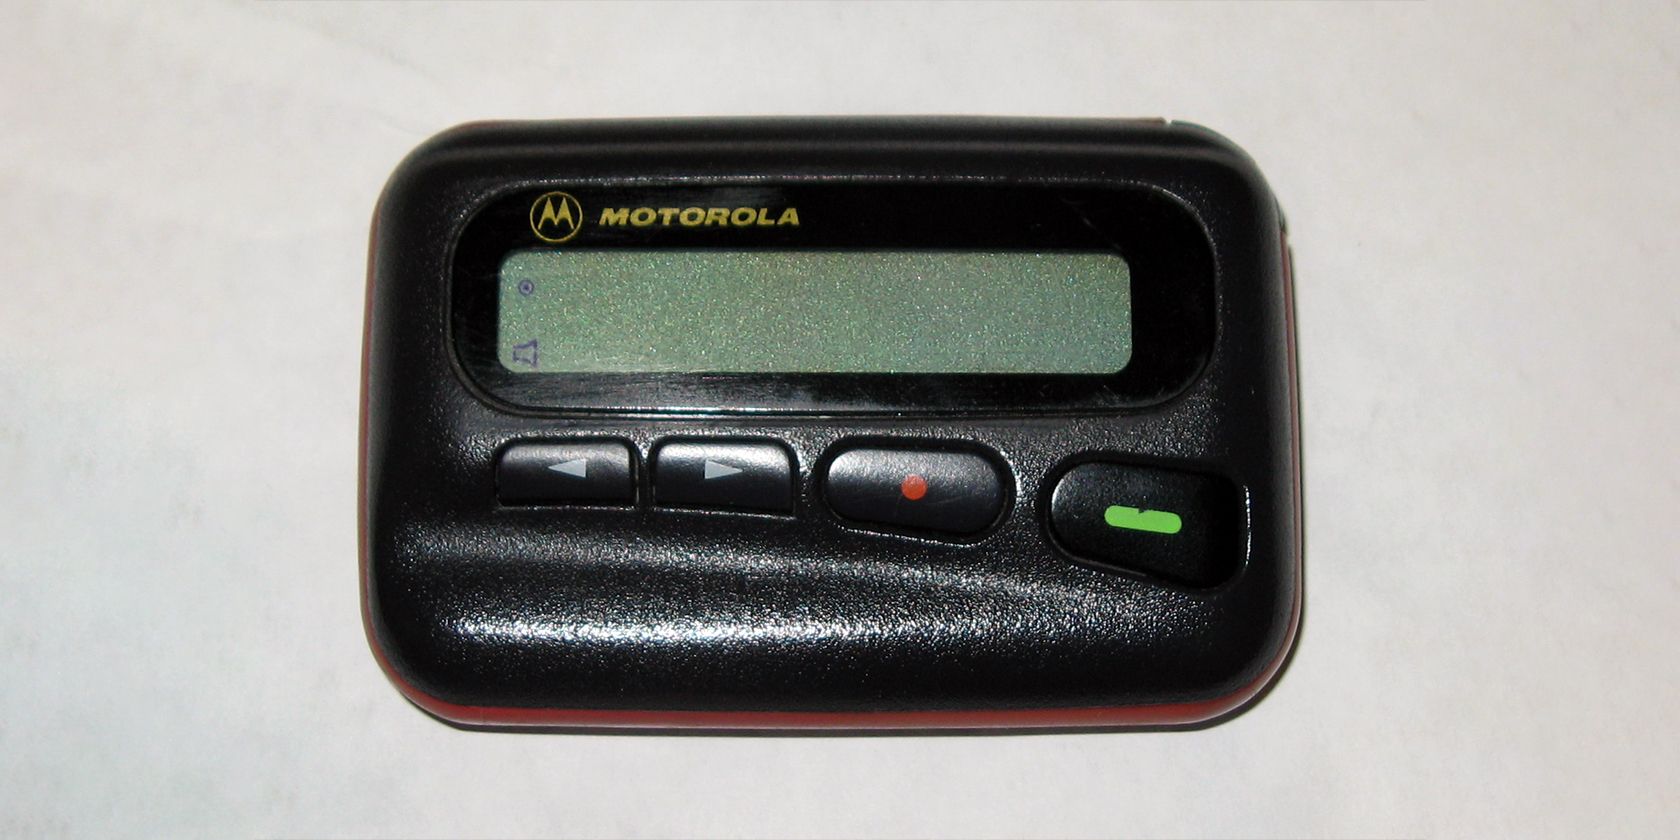 a Motorola pager